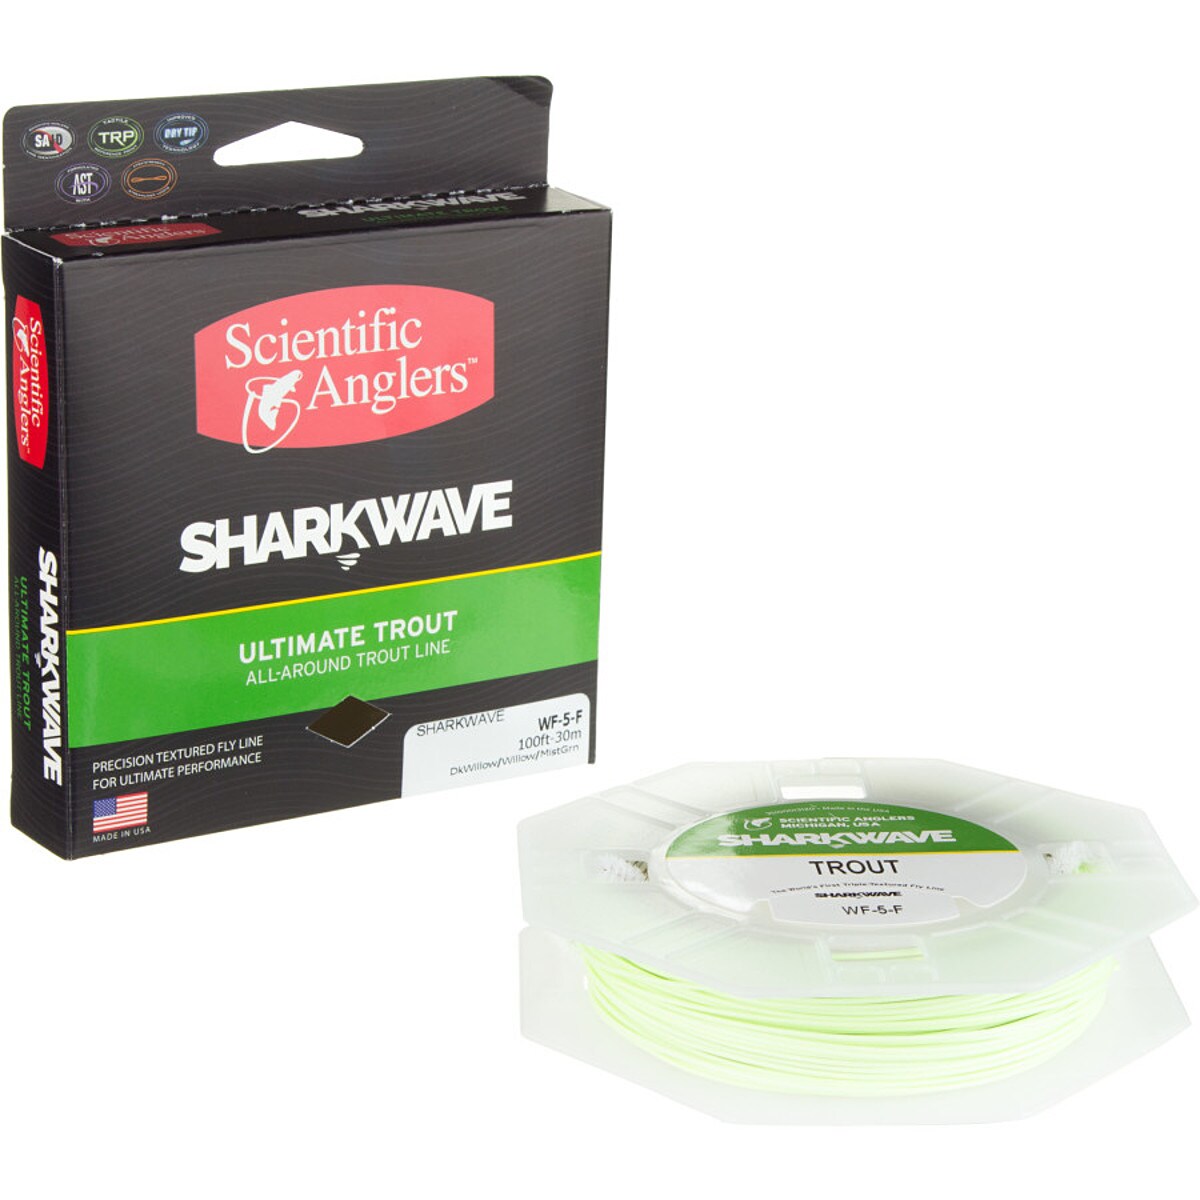 Scientific Anglers Sharkwave Ultimate Trout Taper Fly Line Mist Green/Willow/Dk Willow, WF-3-F